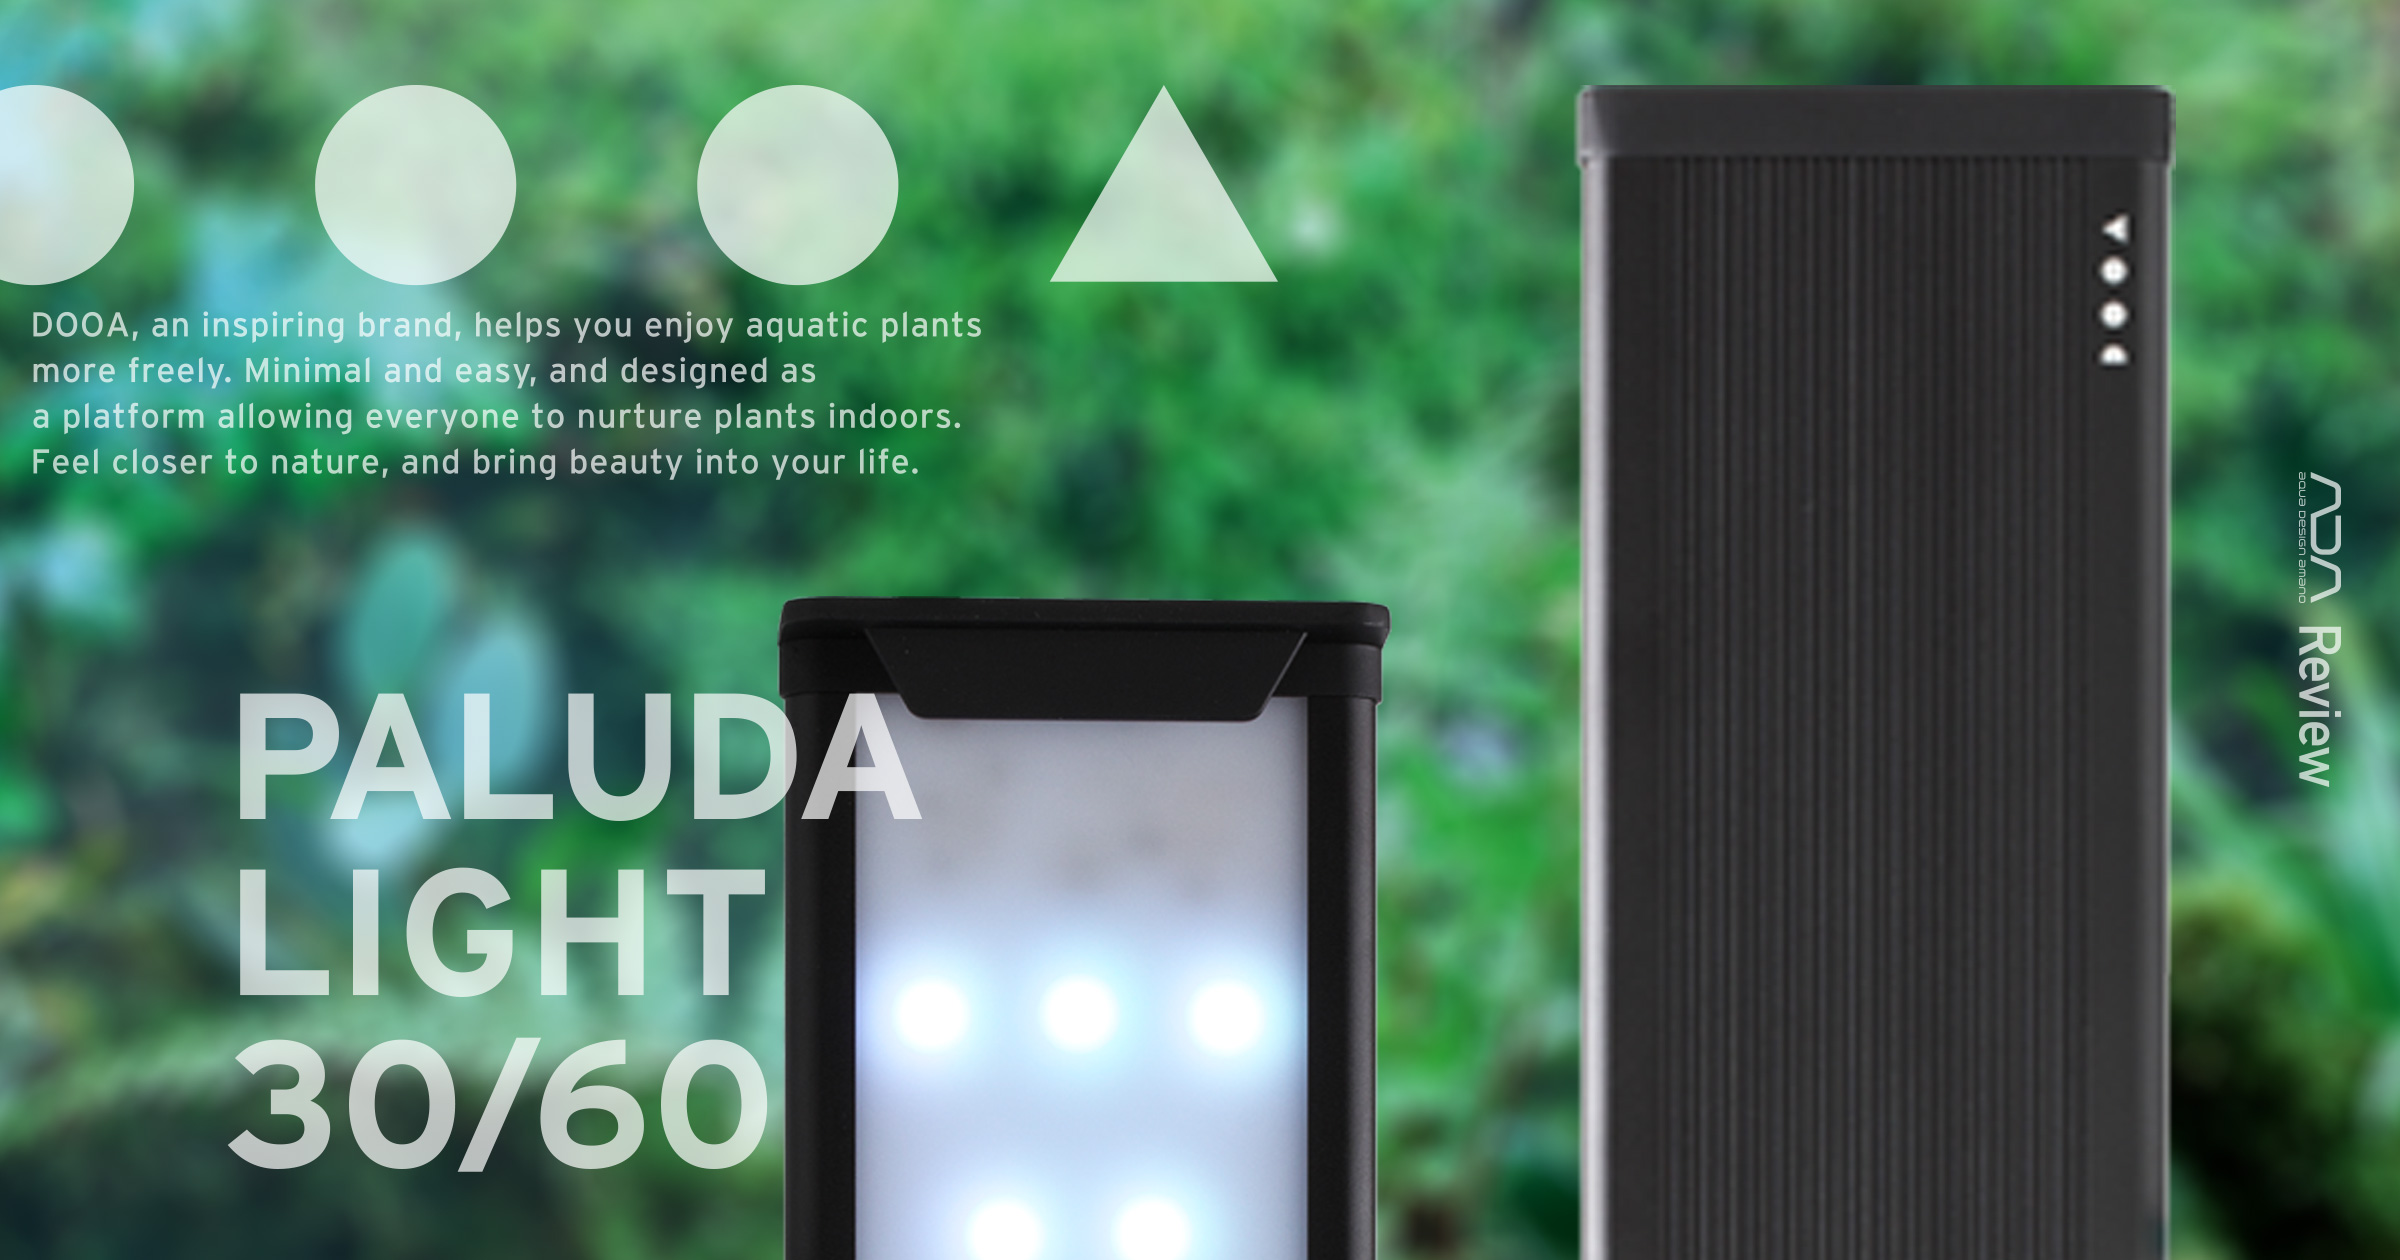 DOOA PALUDA LIGHT 30/60 ‘Looking for lighting that recreates the ambience of a forest floor’